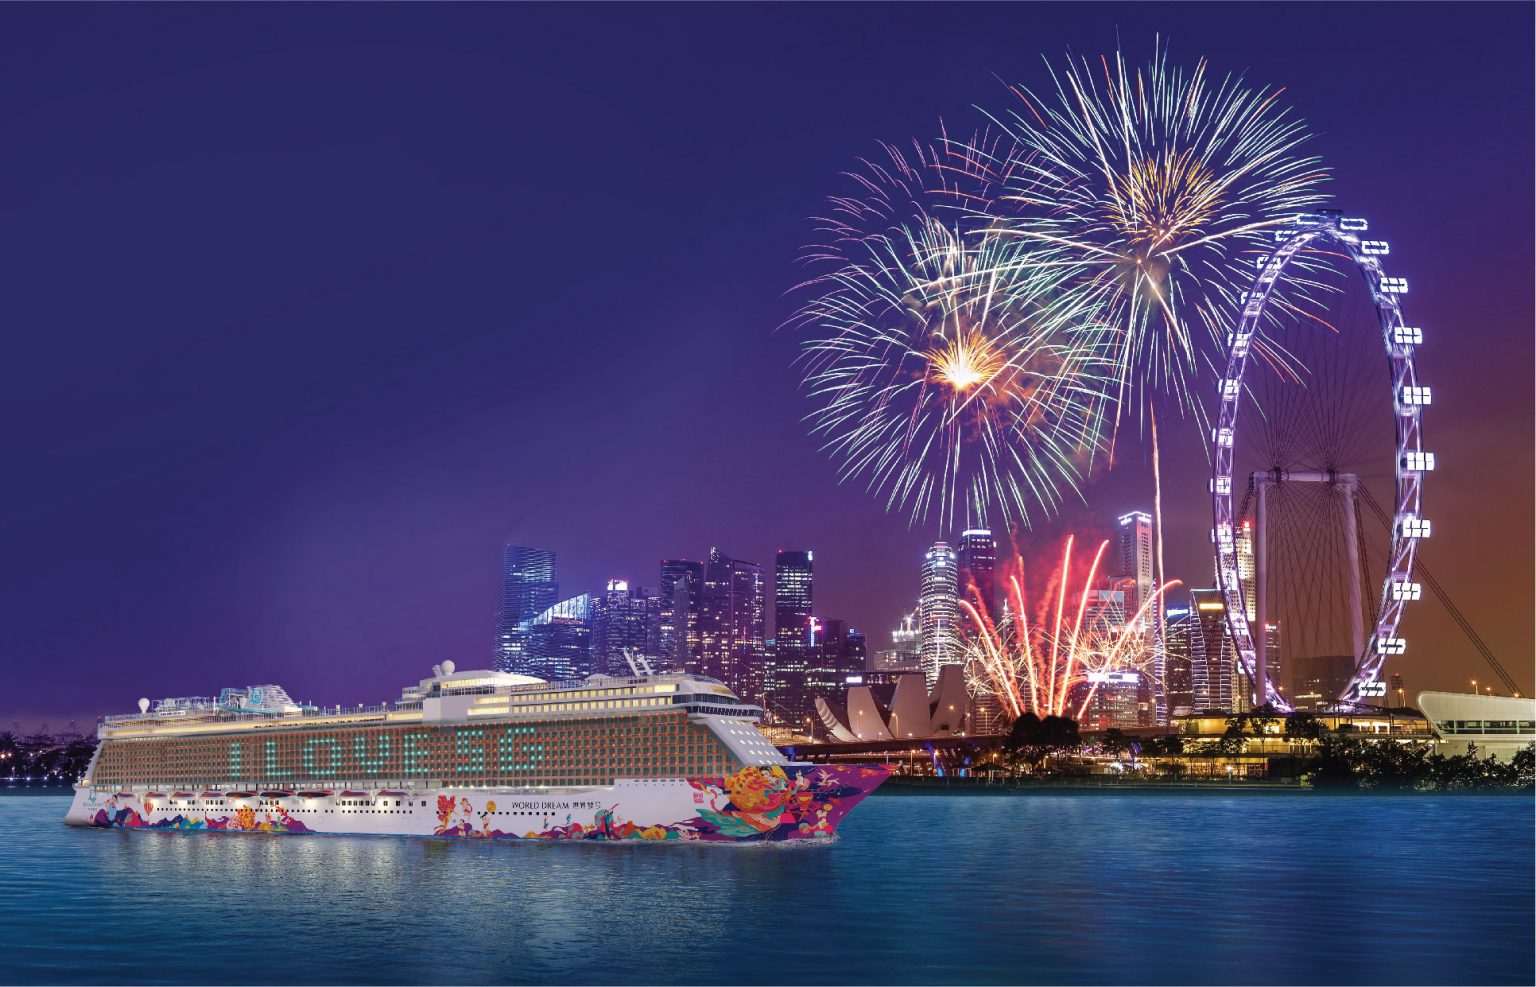 World Dream first cruise ship to restart service in Singapore with